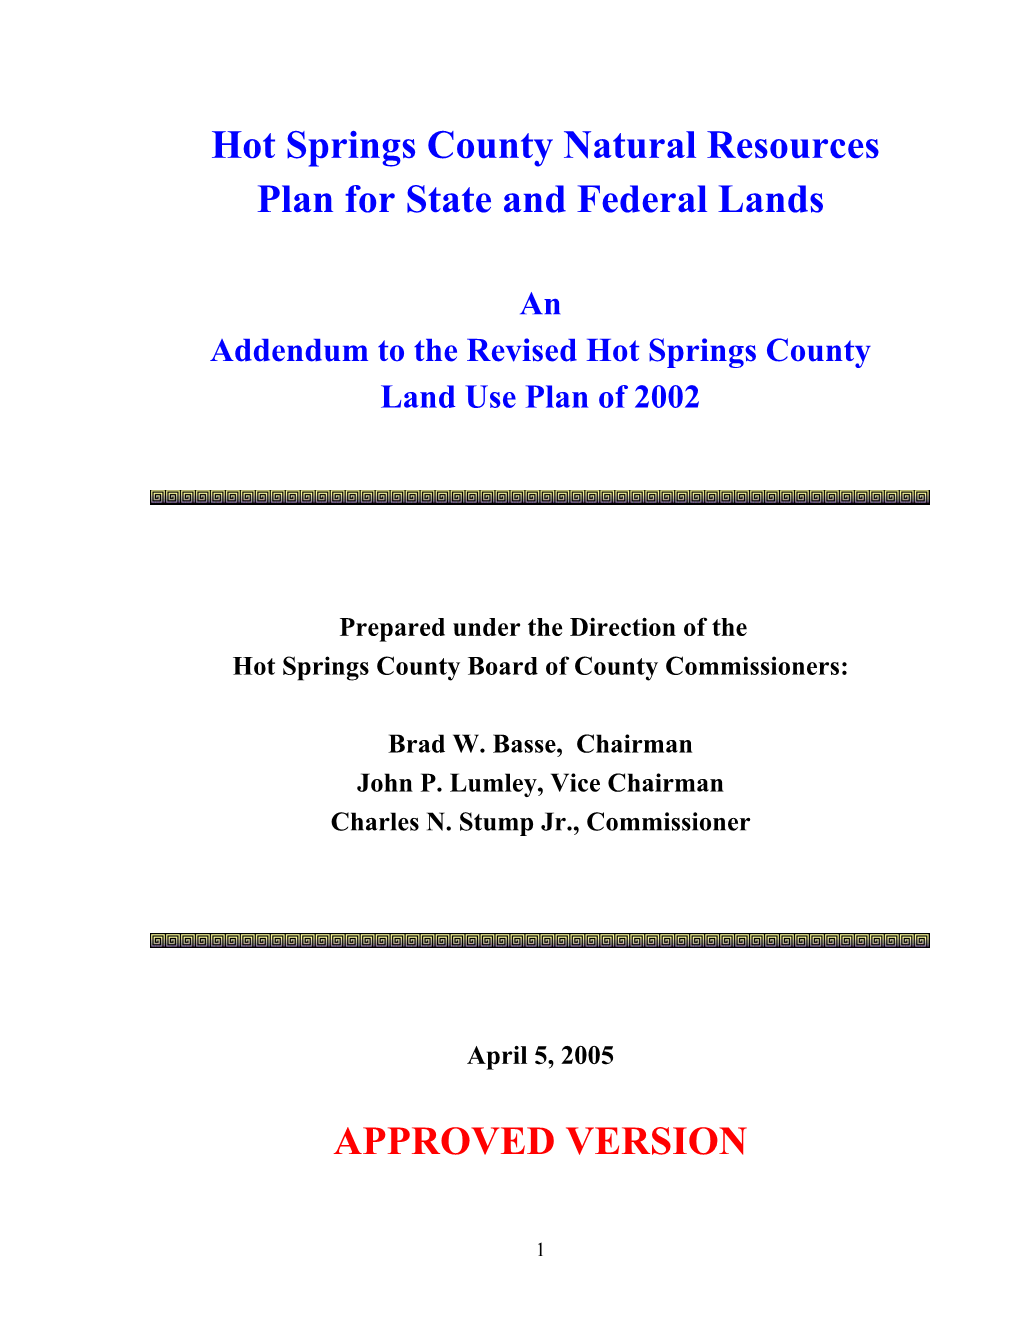 Hot Springs County Natural Resources Plan for State and Federal Lands APPROVED VERSION